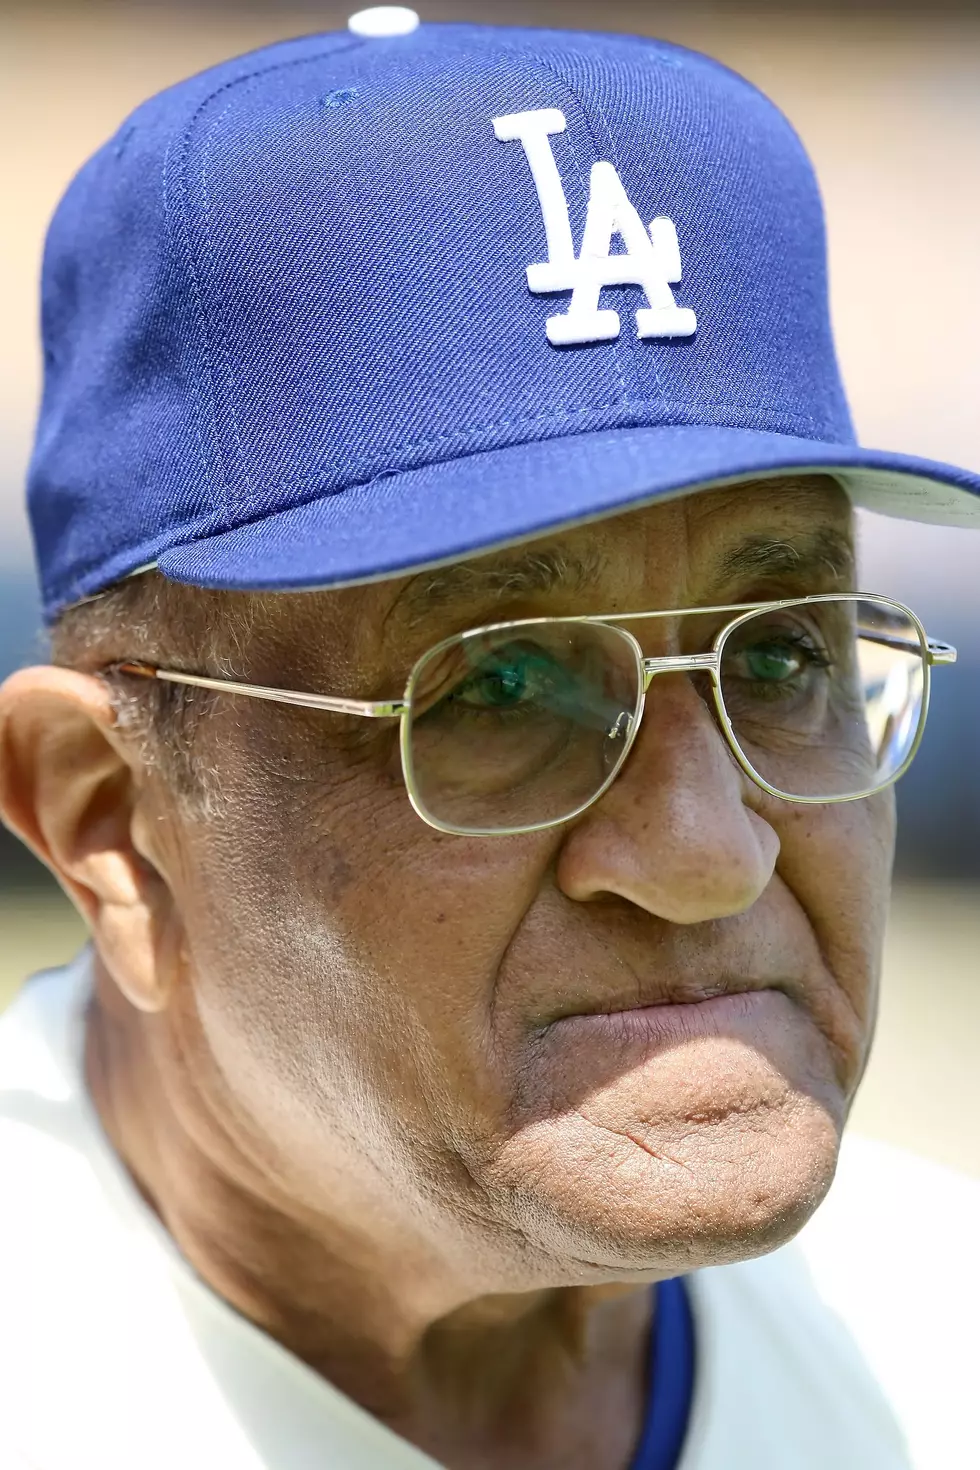 Don Newcombe, Brooklyn Dodgers pitching great, dies at age 92